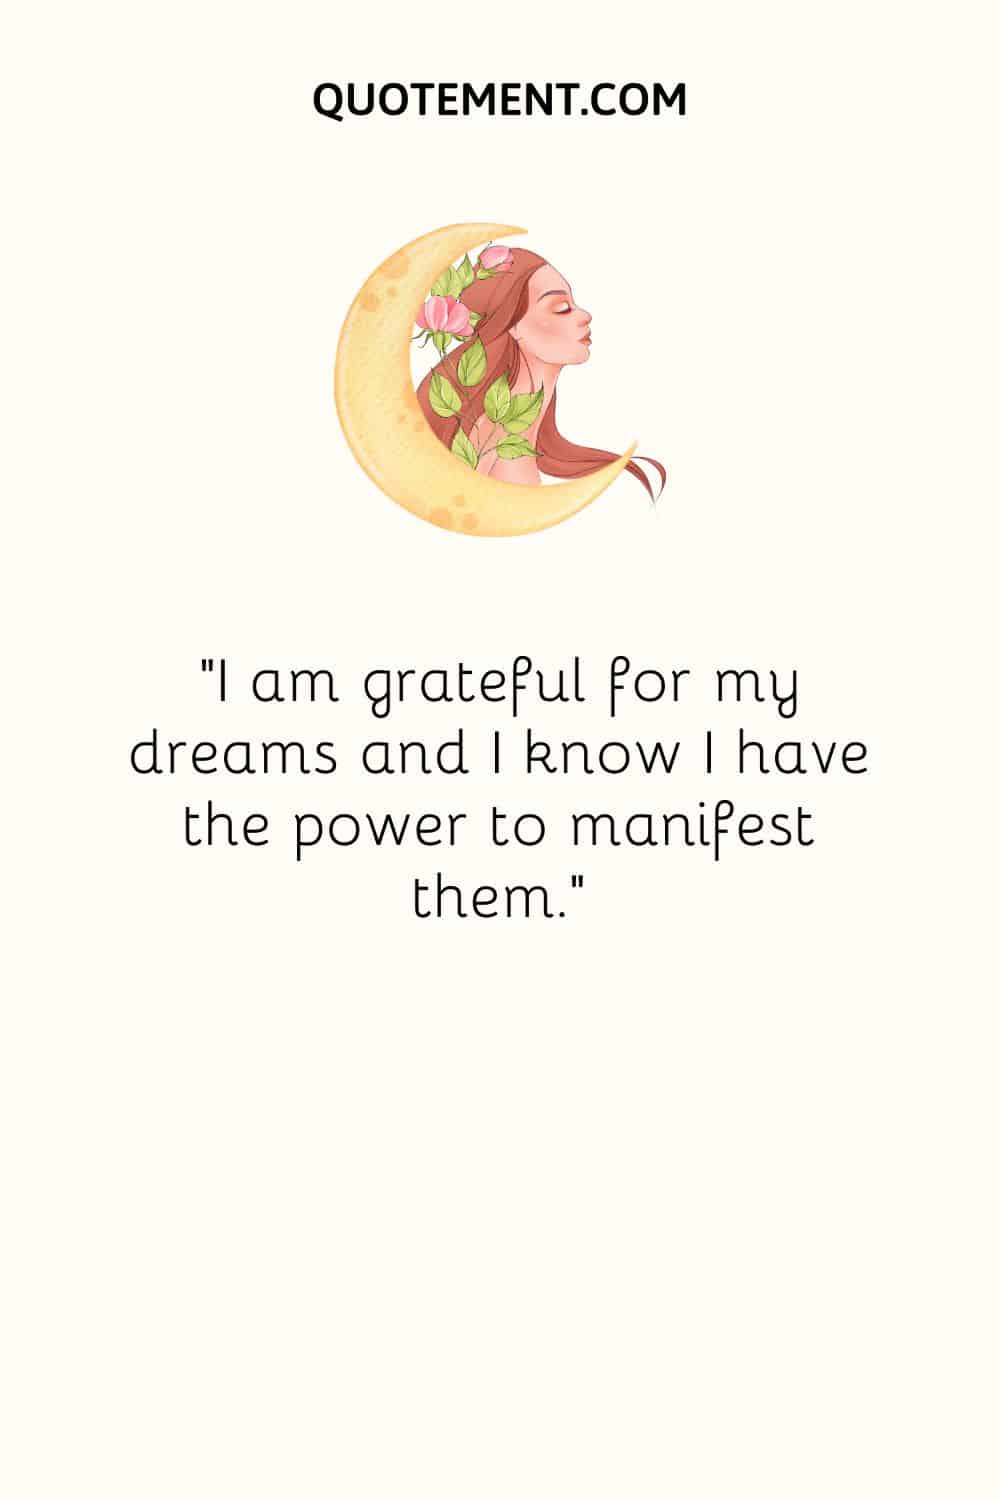 I am grateful for my dreams and I know I have the power to manifest them